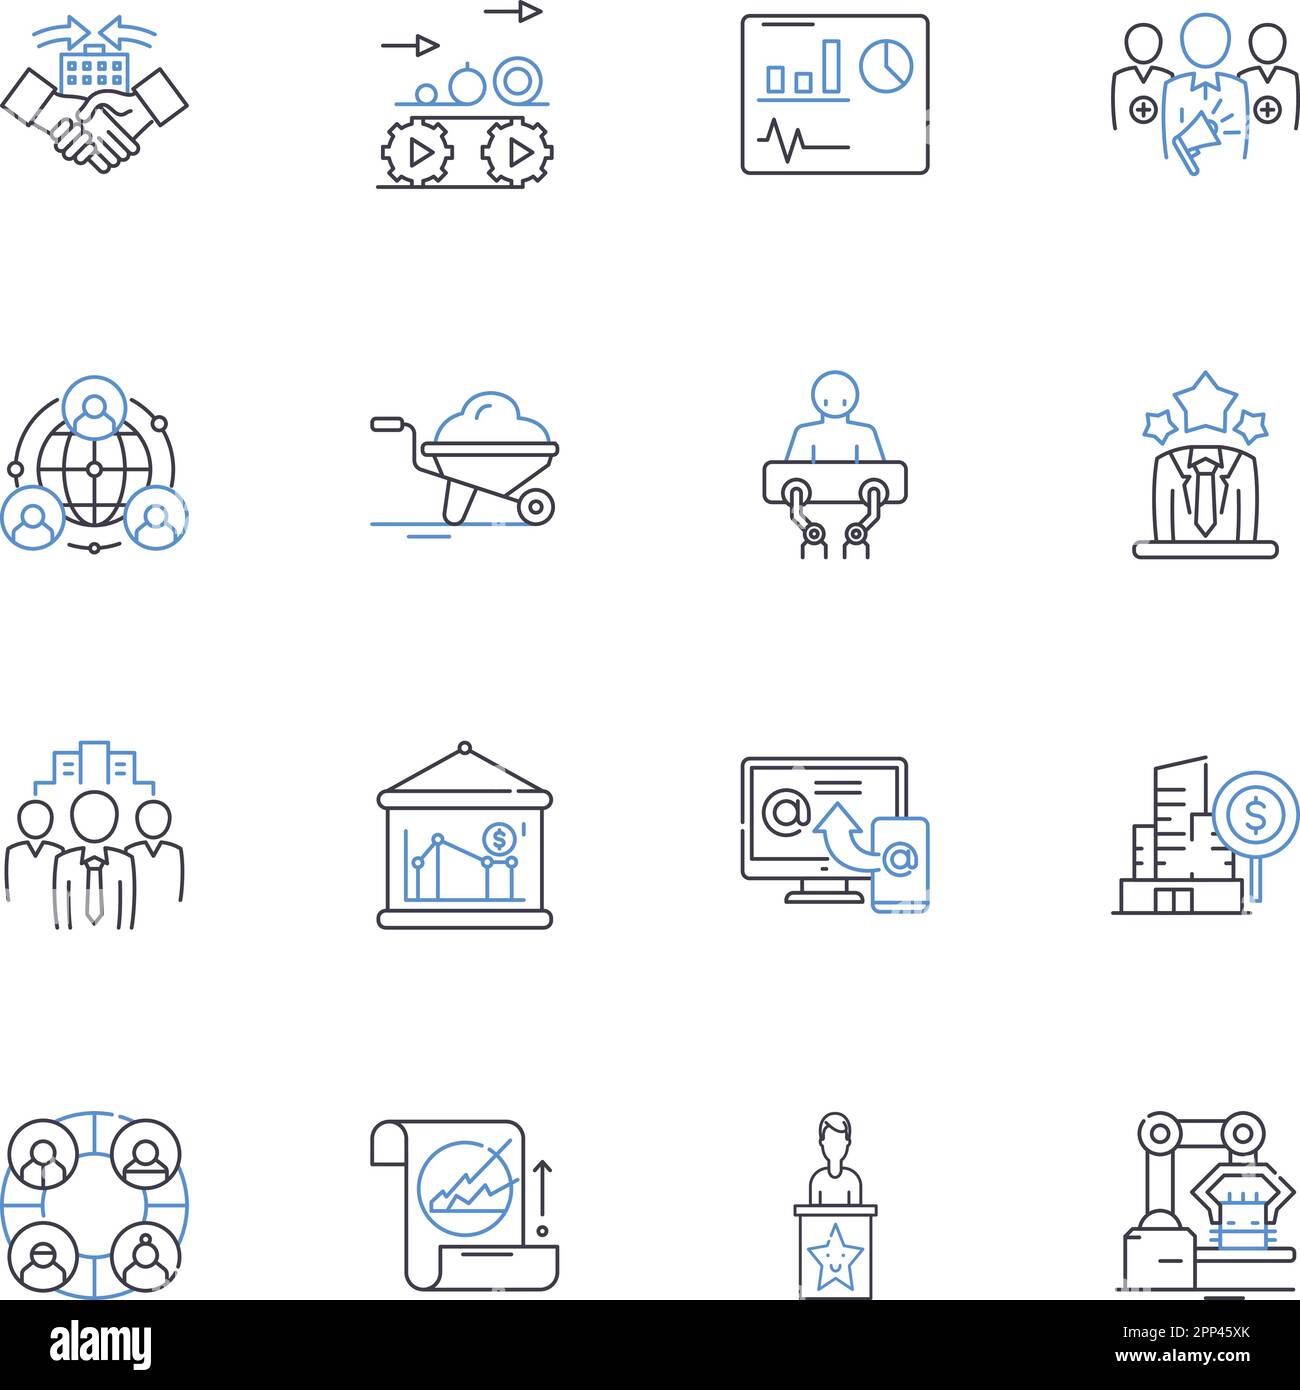 Market analysis line icons collection. Demographics, Trends, SWOT, Competitors, Target, Insights, Segments vector and linear illustration Stock Vector